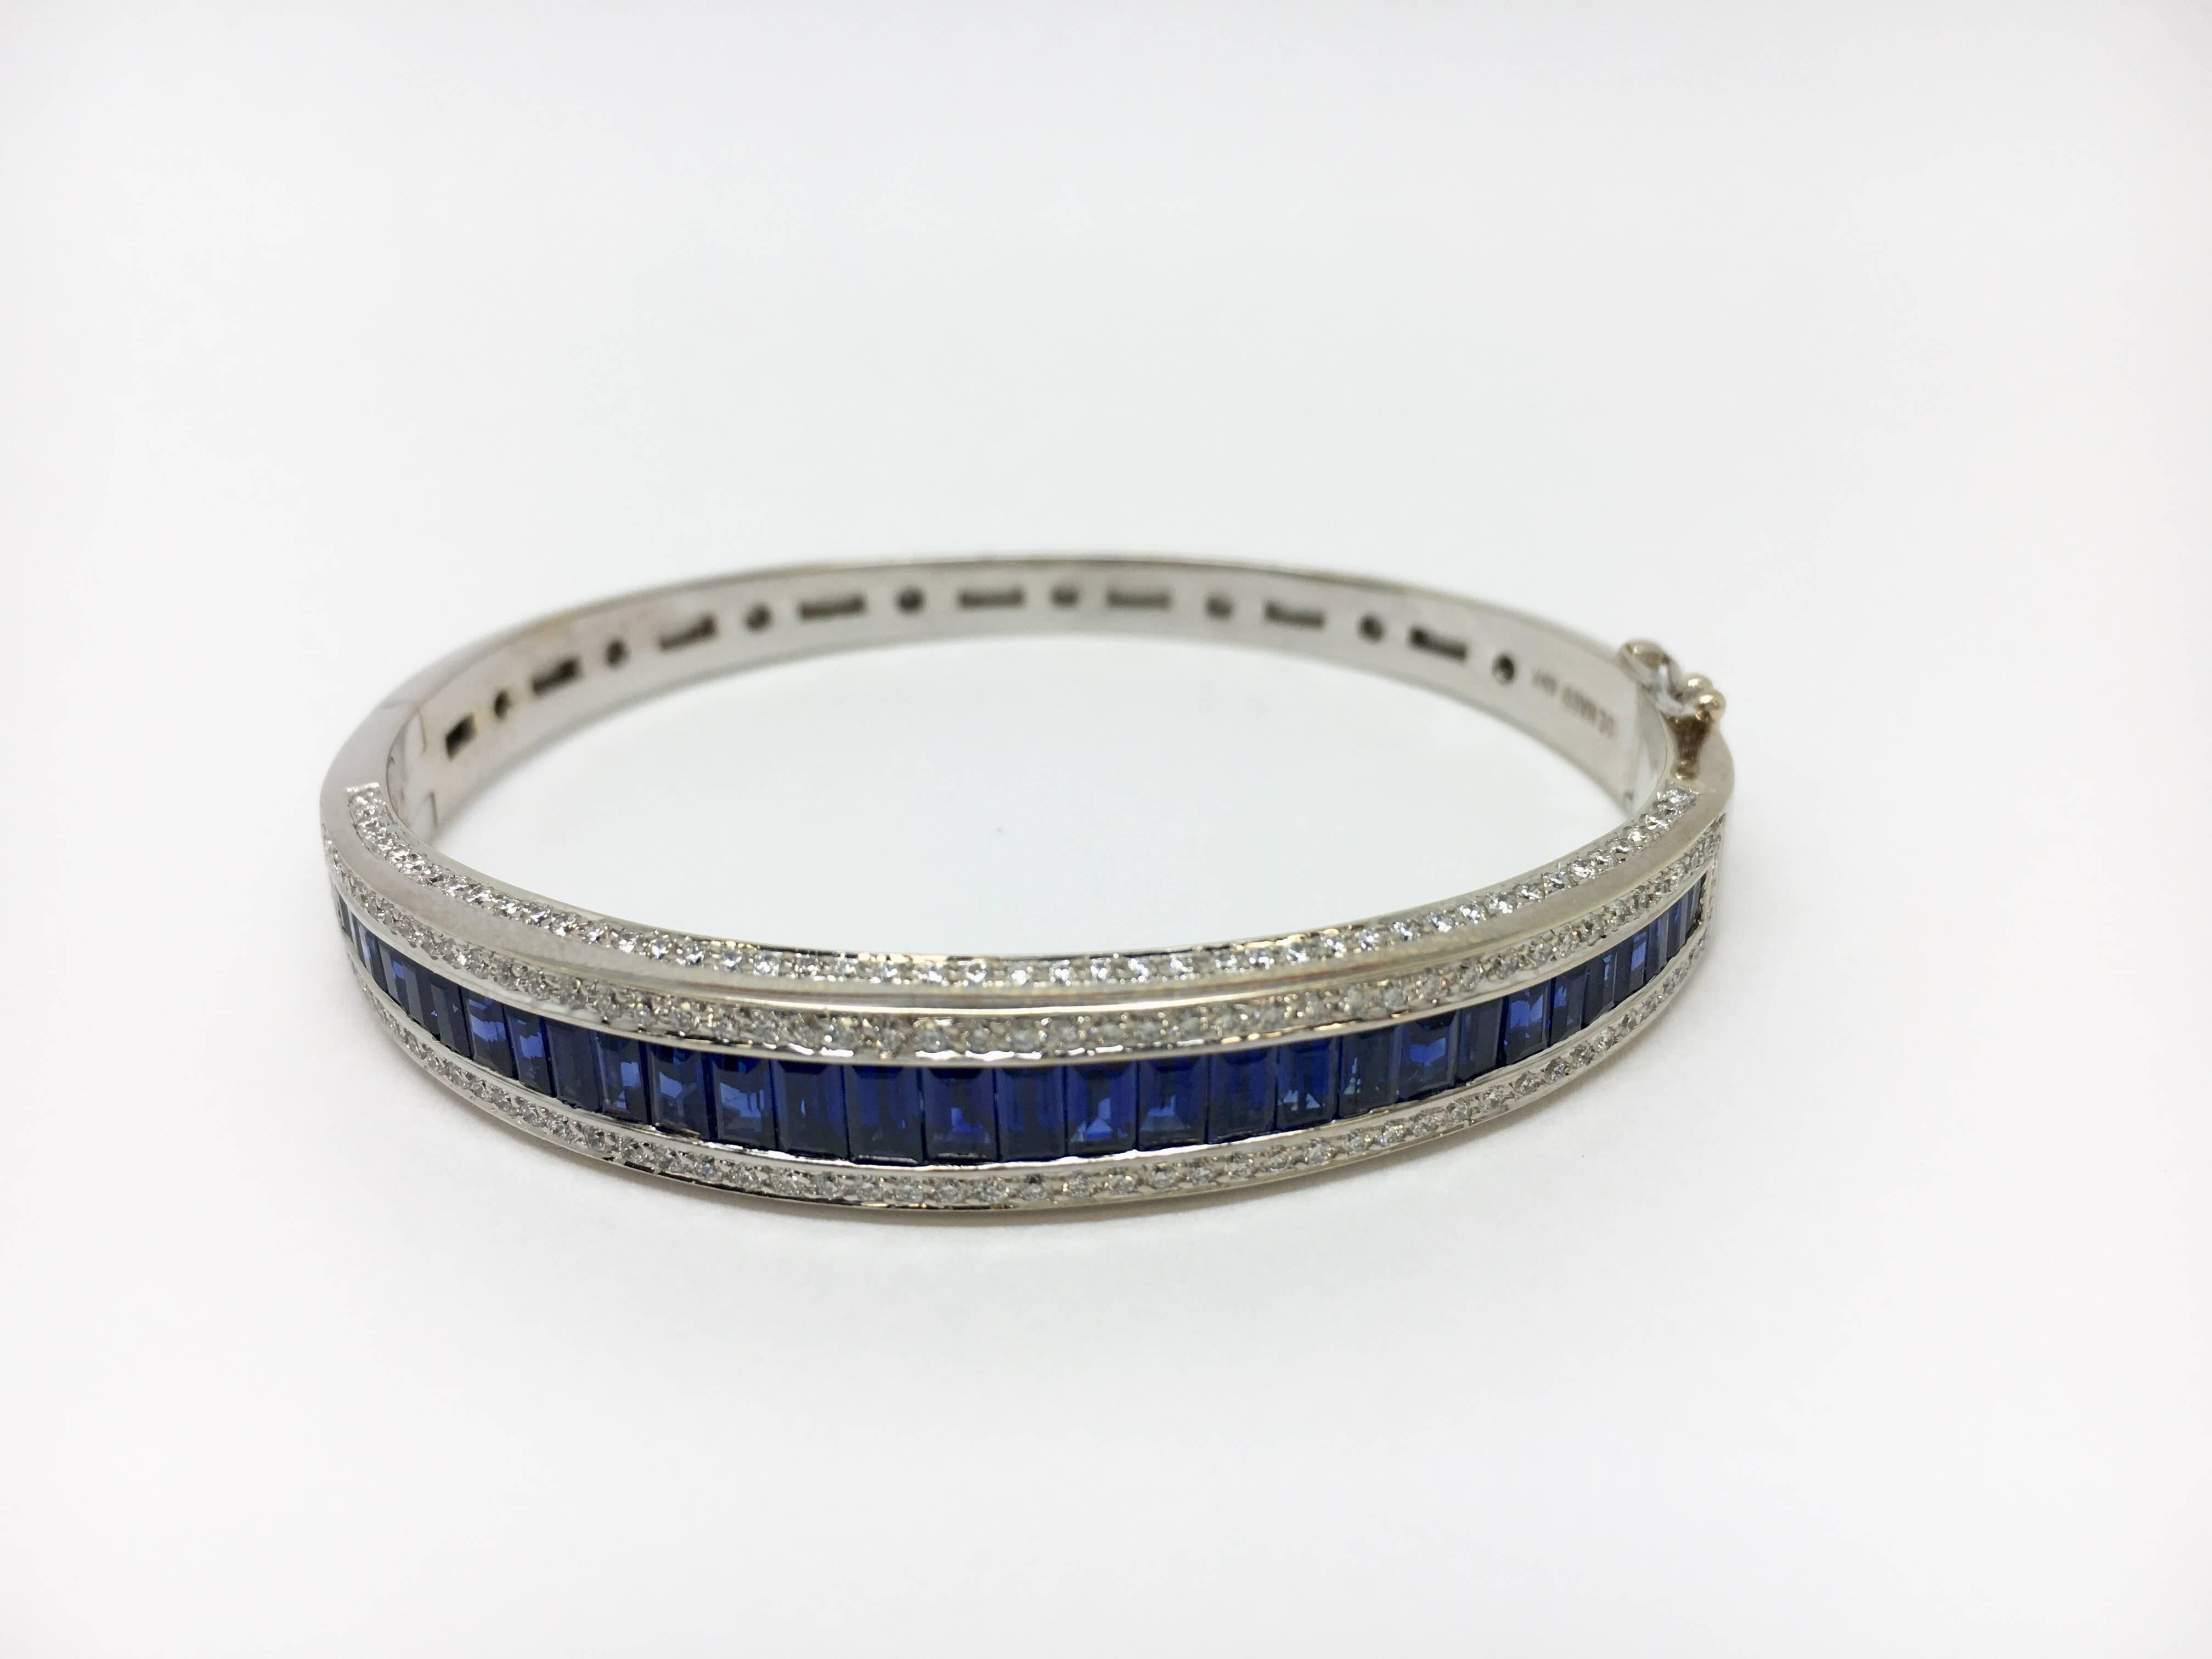 One 18kt white gold bangle featuring 5.25ctw of blue sapphires and 1.75ctw VS/SI Clarity, G/H Colour, good cut round brilliant diamonds. Figure eight safety clasp and high polish finish gold. Pre-Owned